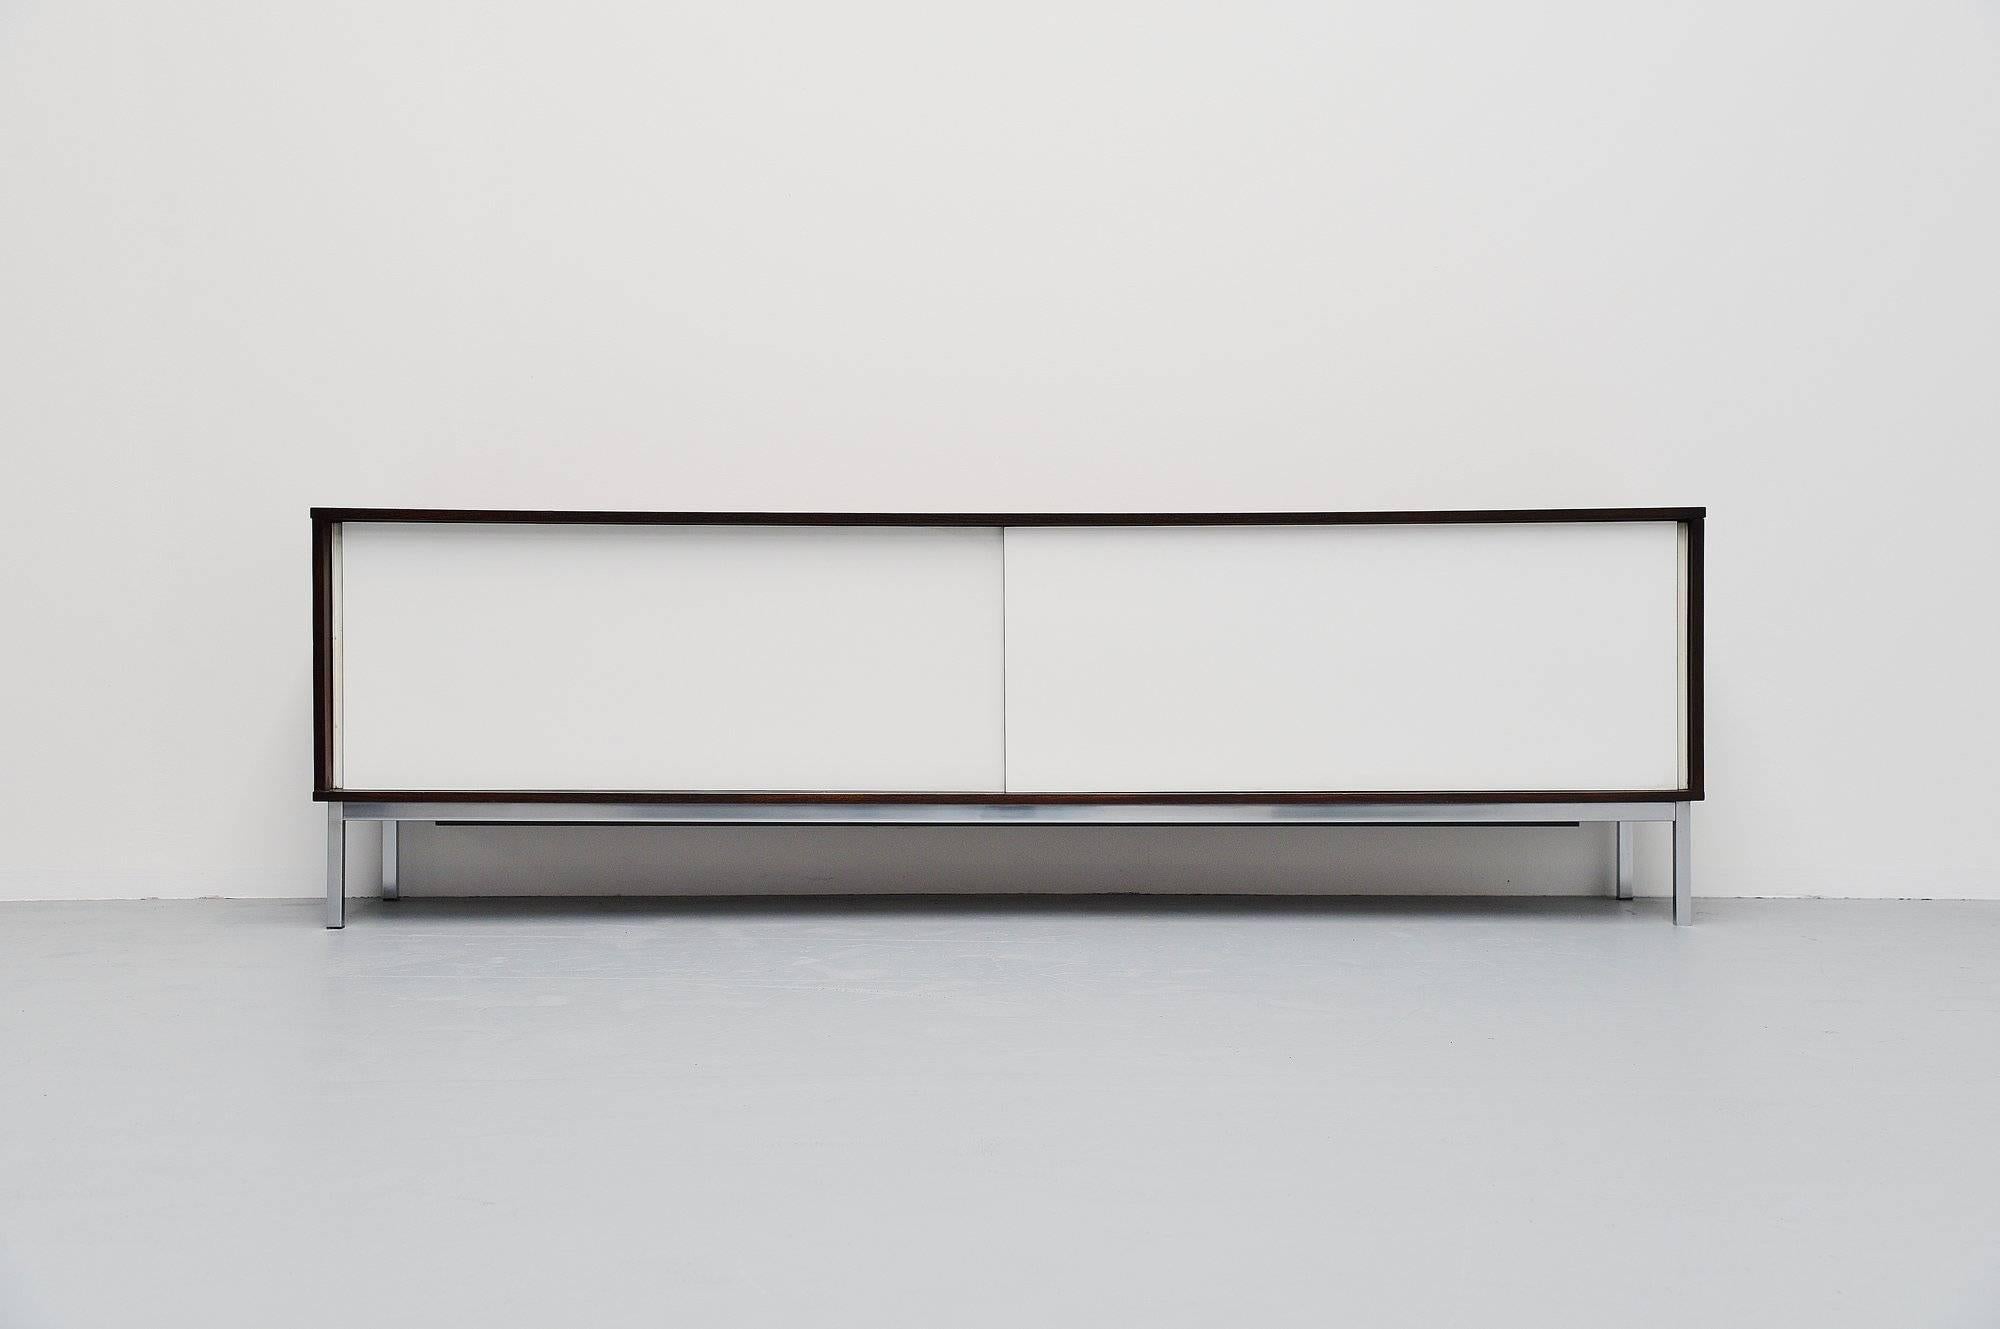 This is for a fantastic modernist sideboard designed by Martin Visser for ‘t Spectrum Bergeijk, produced between 1965 and 1971. This is the longest version of this sideboard at 236,5 cm. The sideboard is in wenge wood and has white laminated doors,